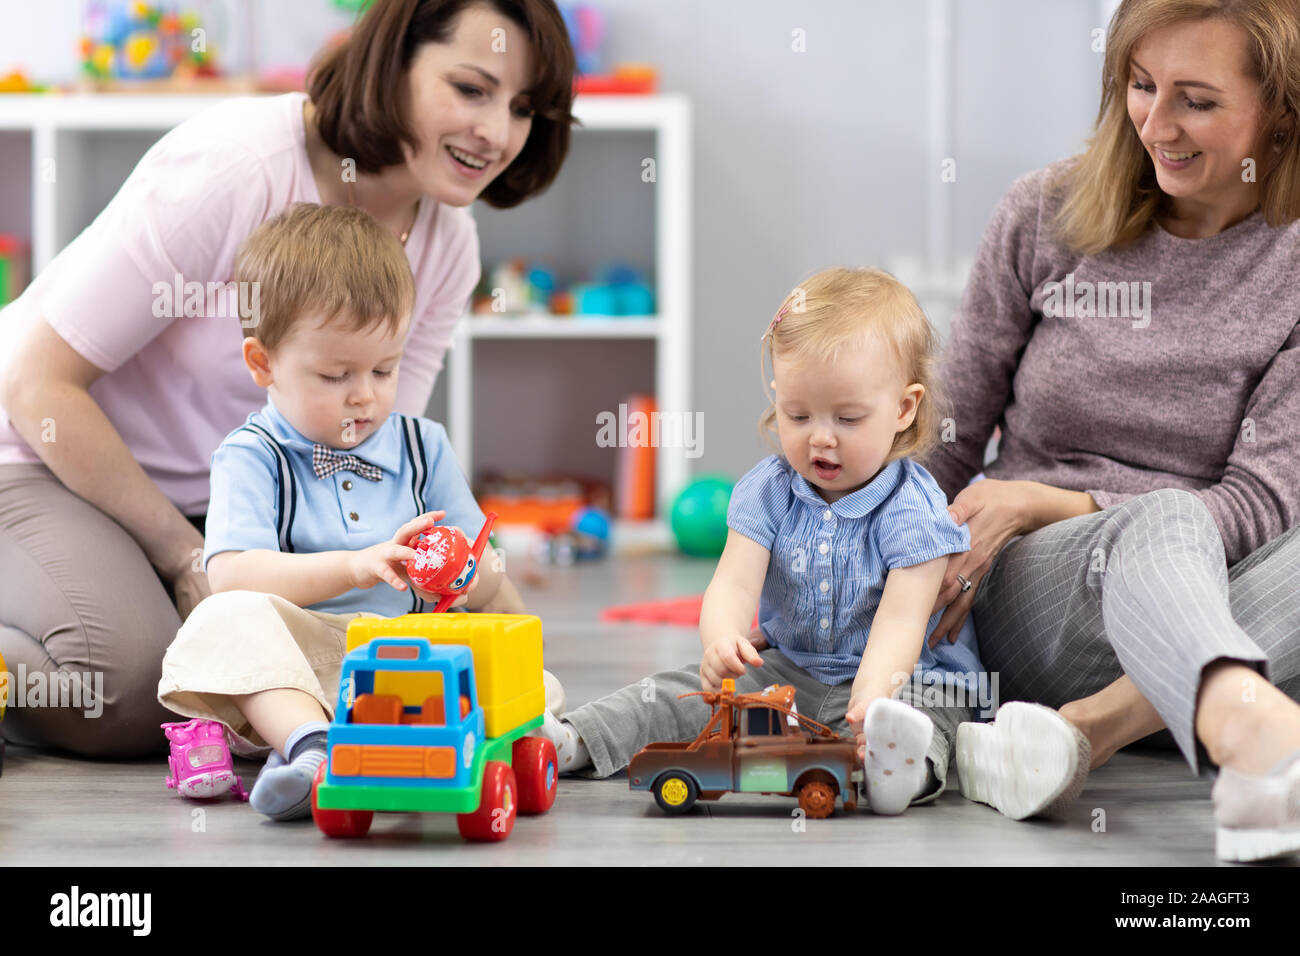 Happy two mothers with their children play at home or daycare interior Stock Photo